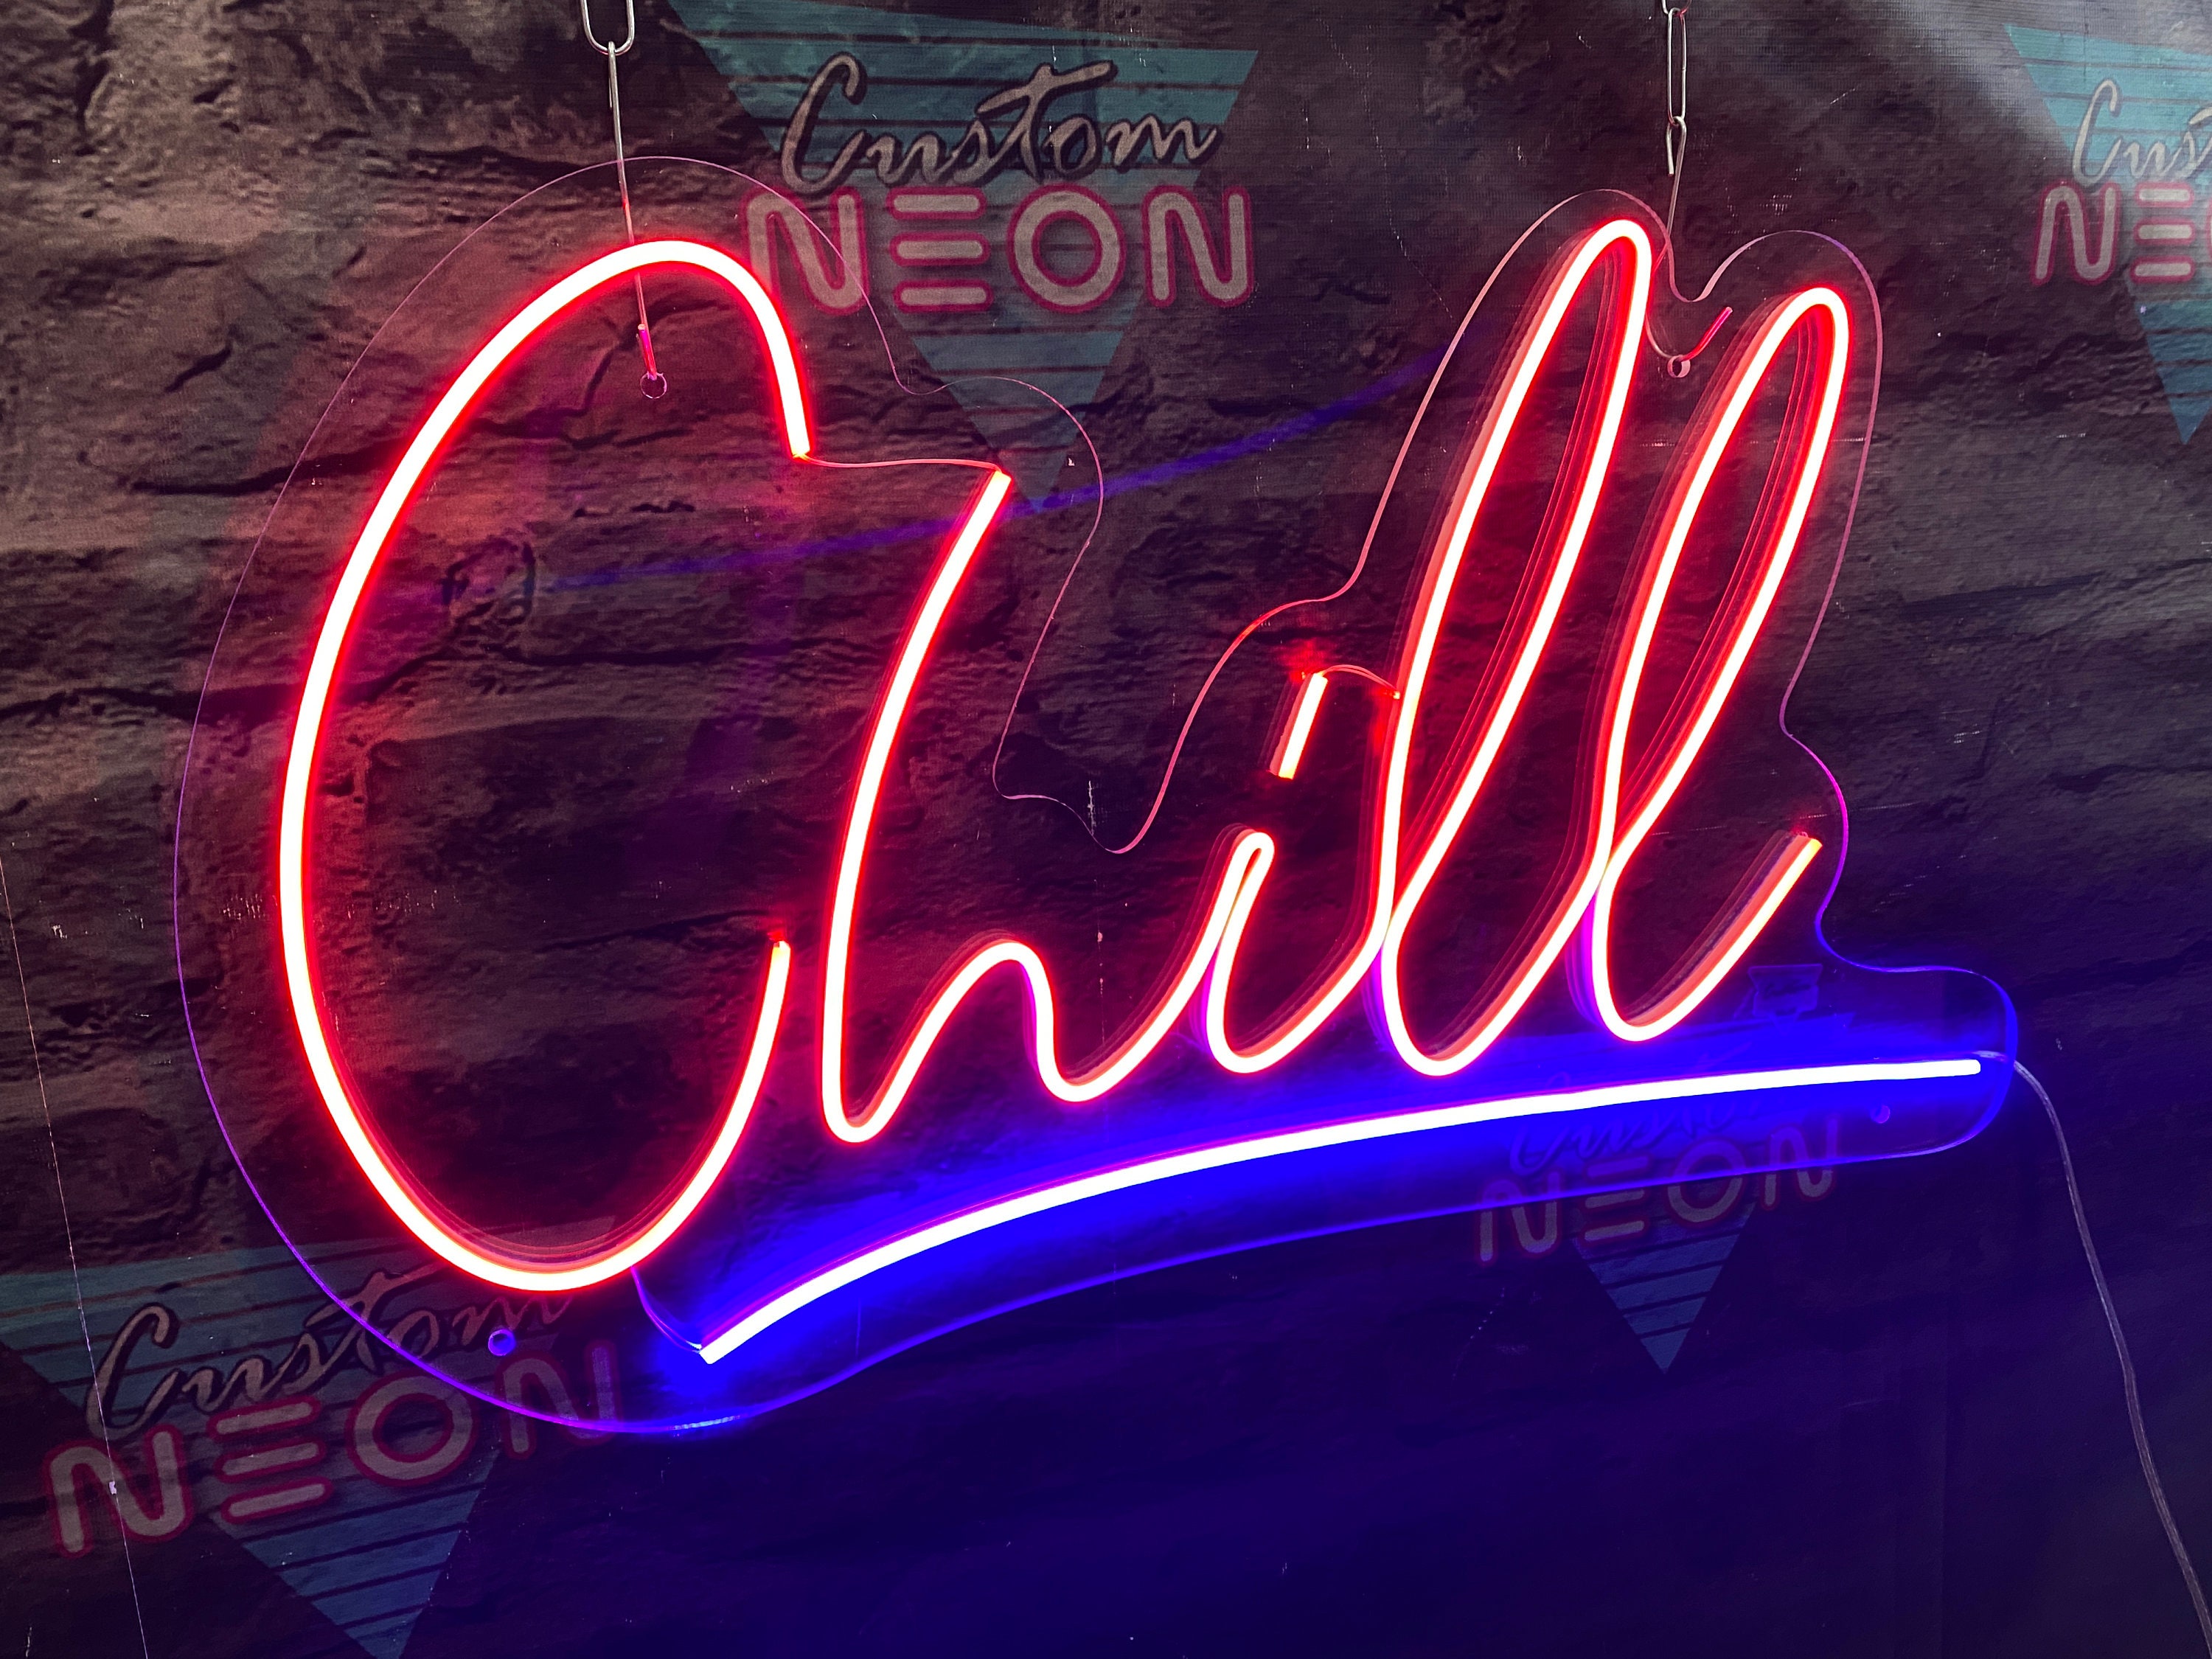 Chill Neon Sign Inspiration Led Light - PageNeon